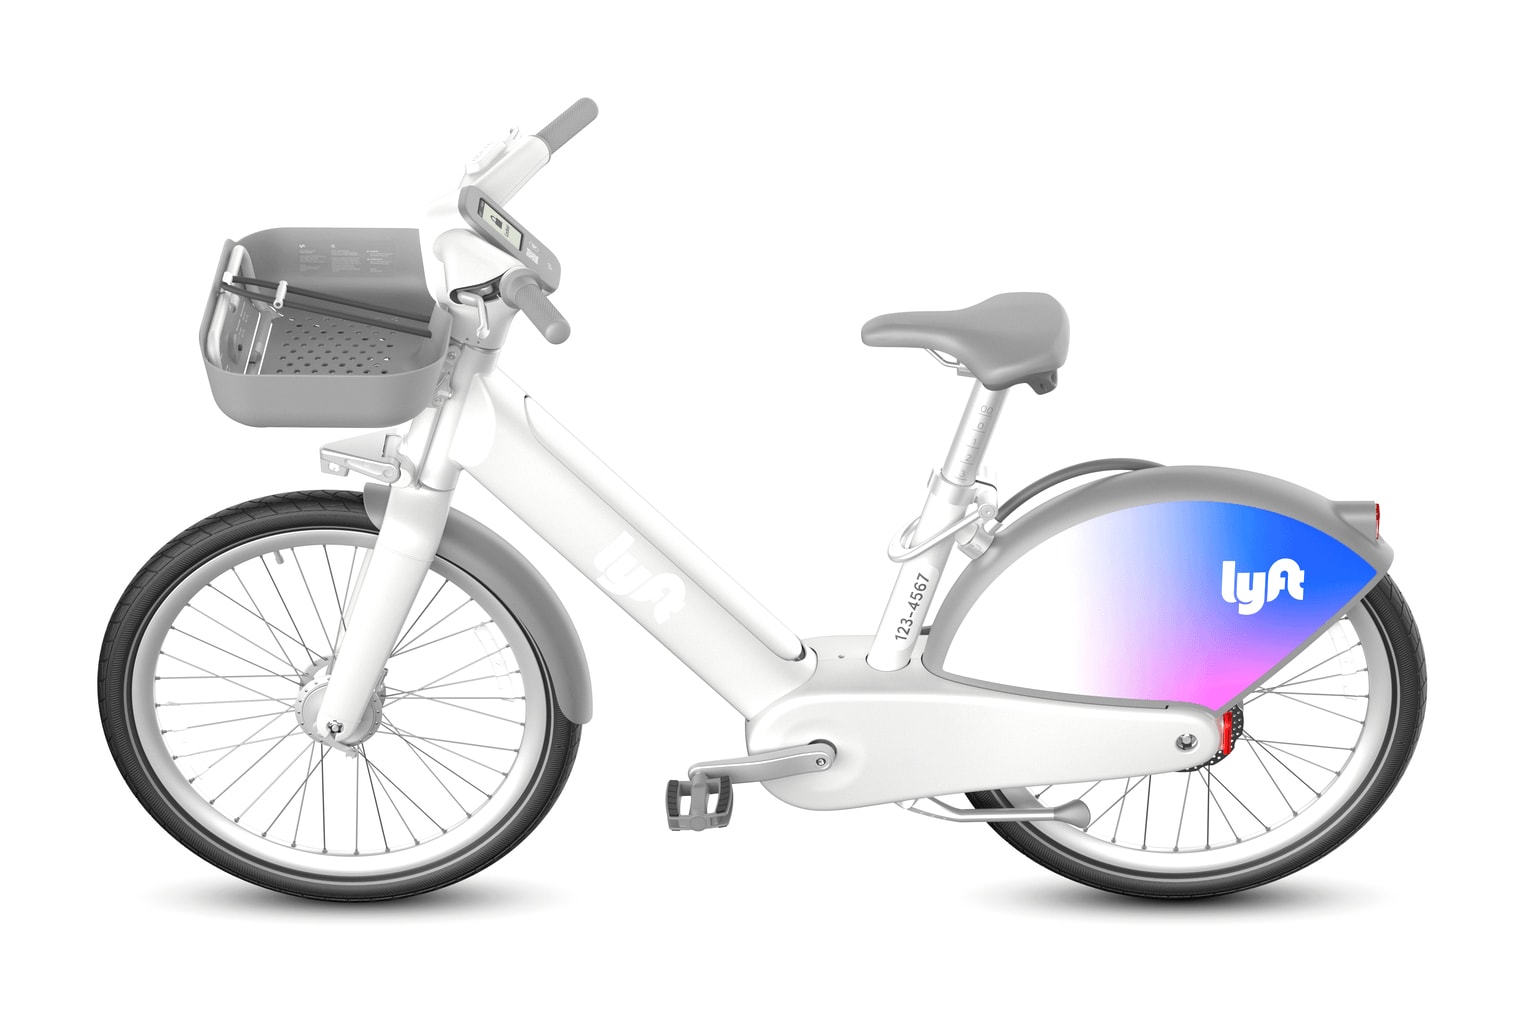 lyft ebike high tech san francisco 60 mph single charge public beta test launch divvy chicago electric bicycle 